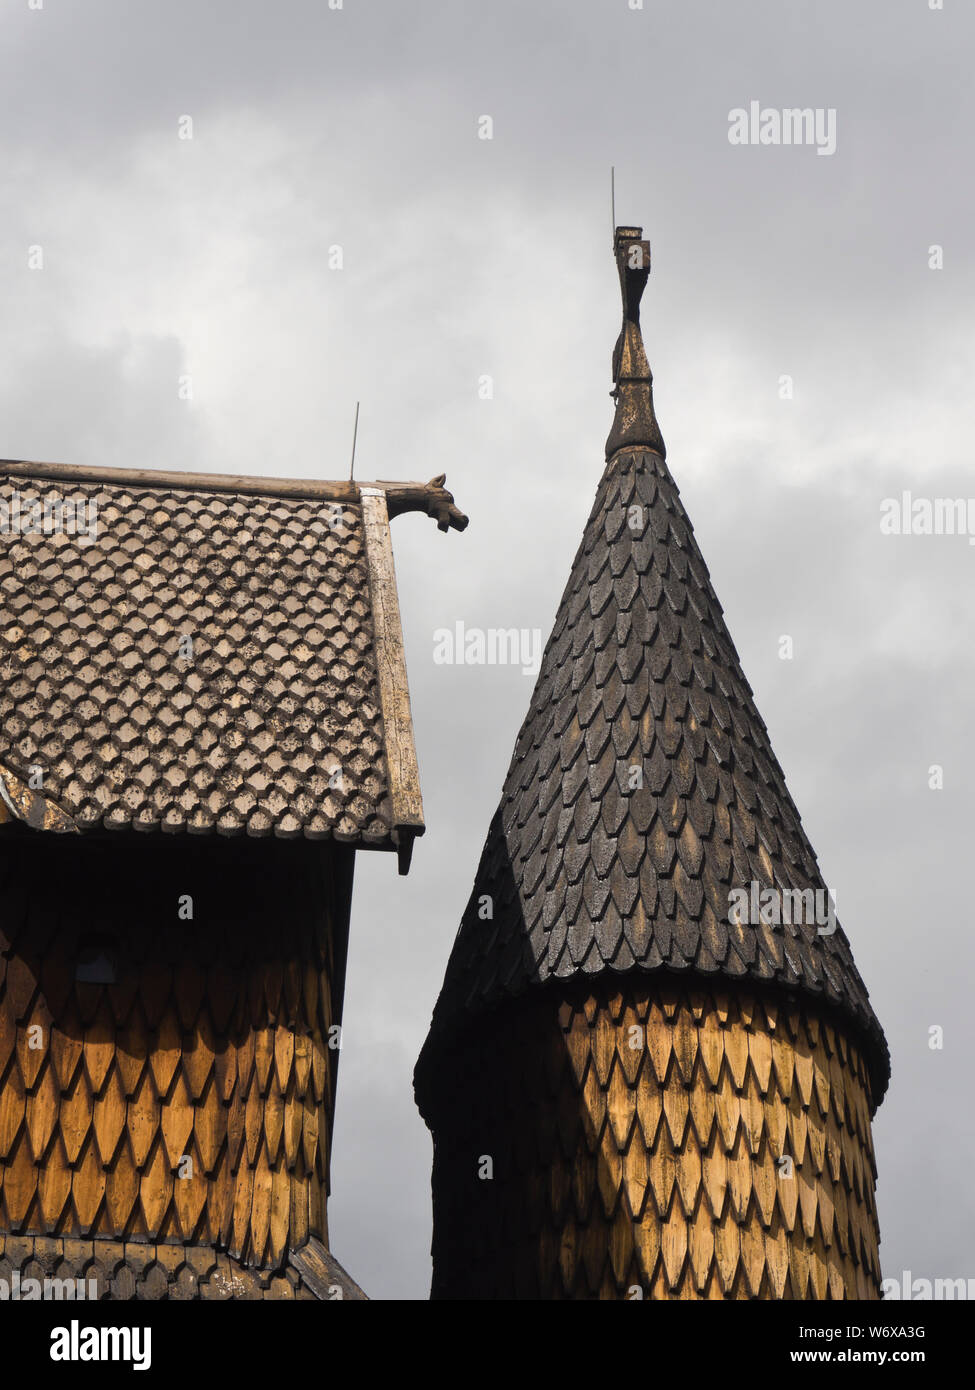 Heddal Stave church from the medieval period, a prime example of Norwegian wooden architecture and a tourist attraction, tower, carved figure, tiles Stock Photo